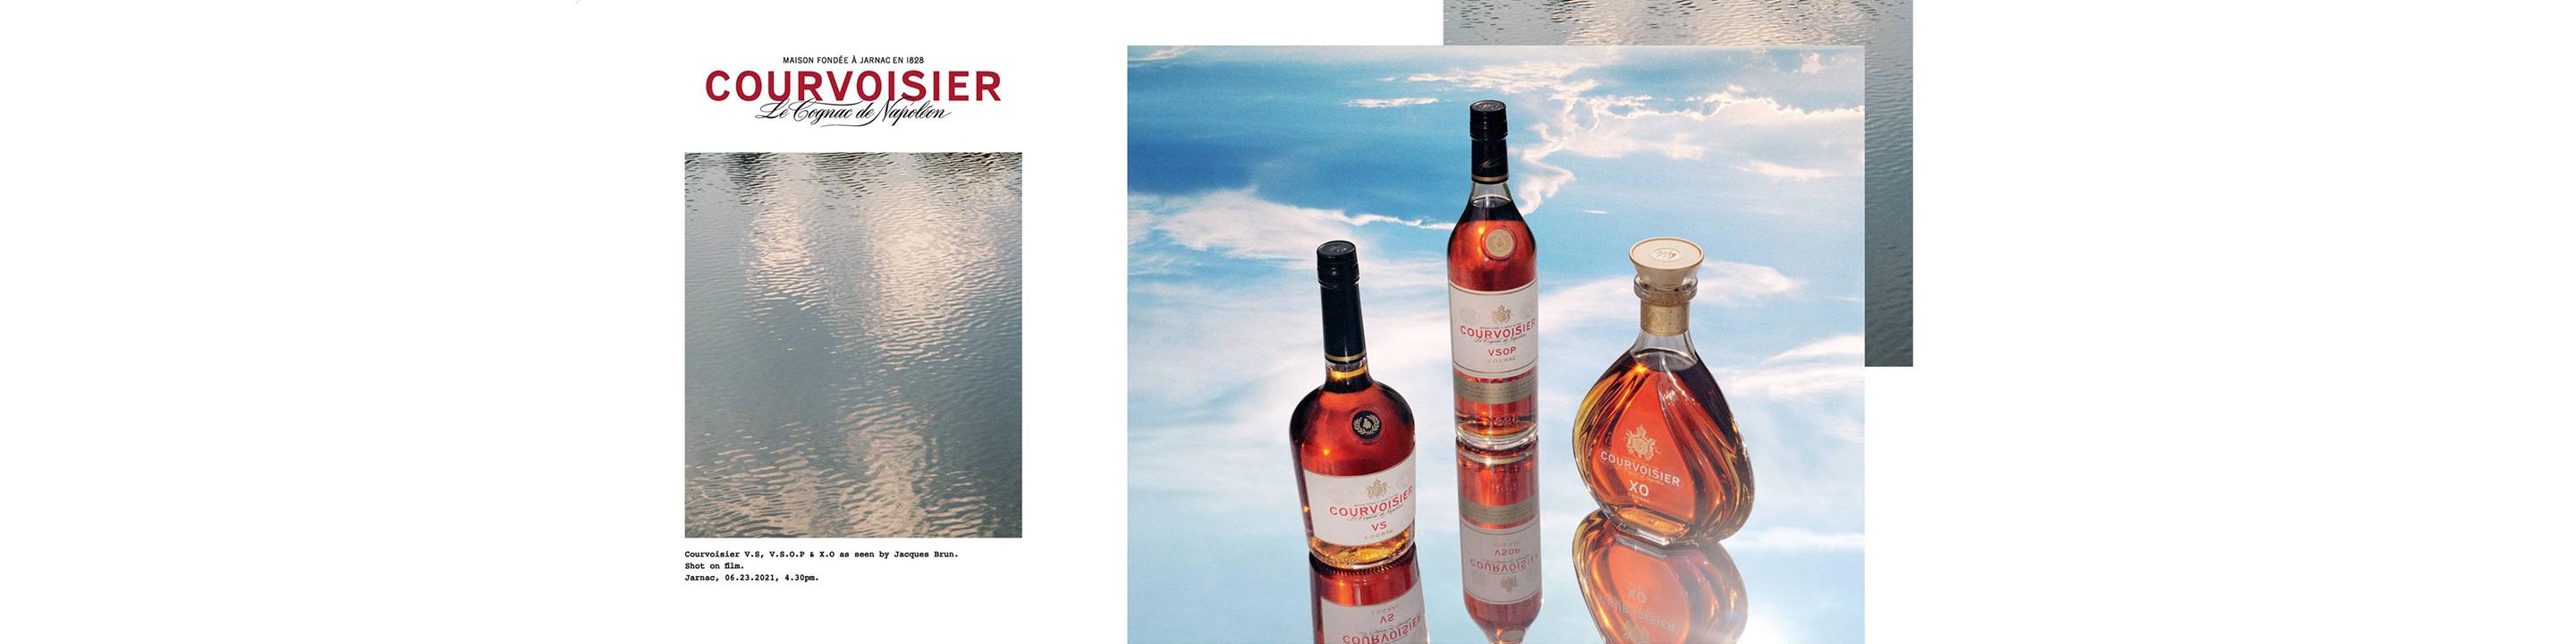 Since its creation in 1809, Courvoisier® has crafted cognac to be rich and sophisticated to ignite the senses and give reason to celebrate. Inspired by innovation, ingenuity and elegance. 

Buy Courvoisier online now from nearby liquor stores via Minibar Delivery.